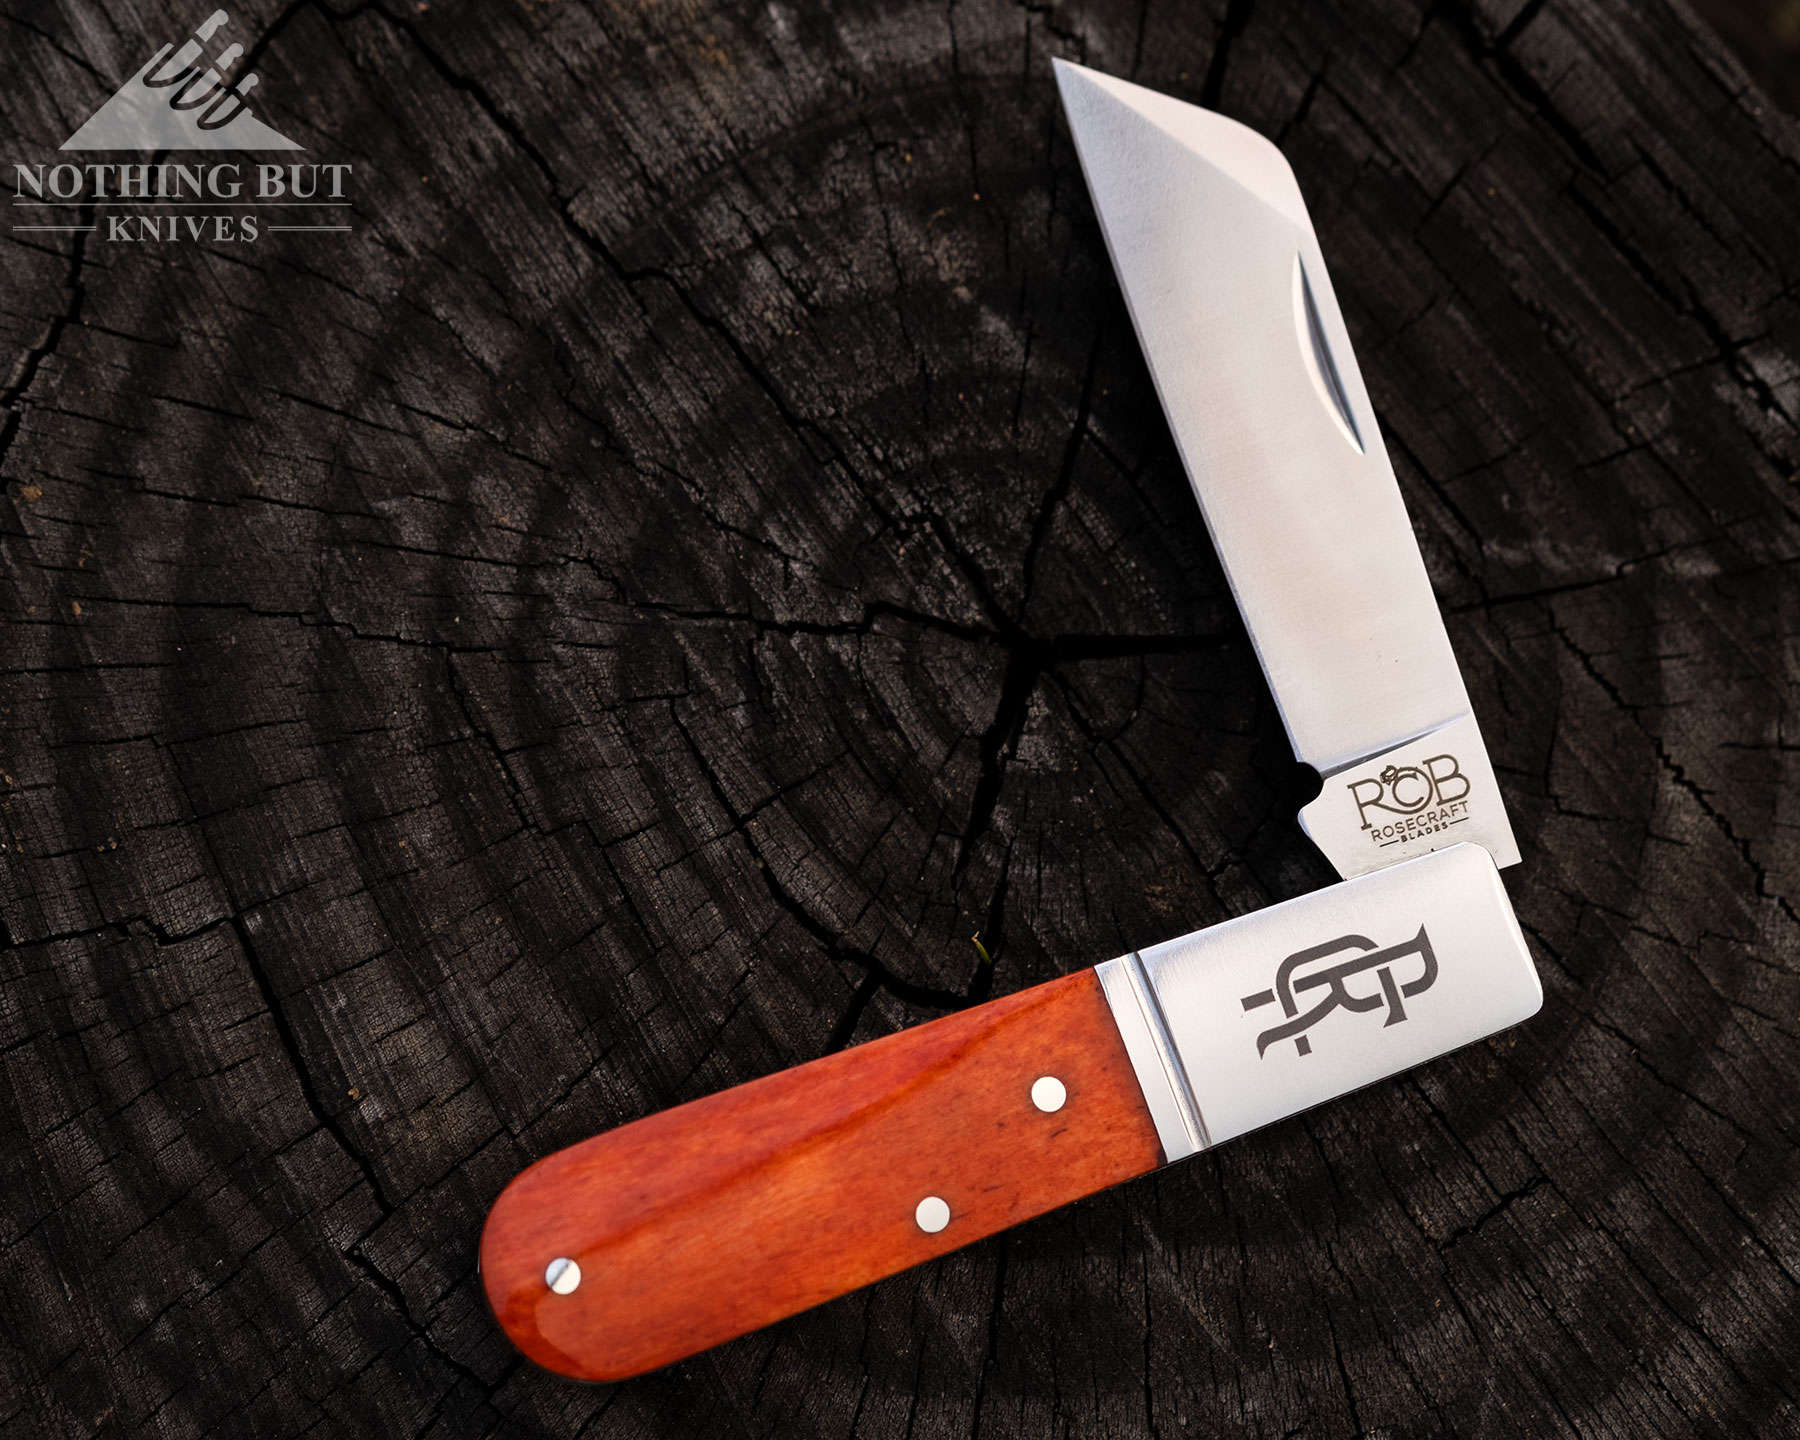 RoseCraft knives established themselves as a trusted brand quickly based on the overall quality of their initial knife releases. 